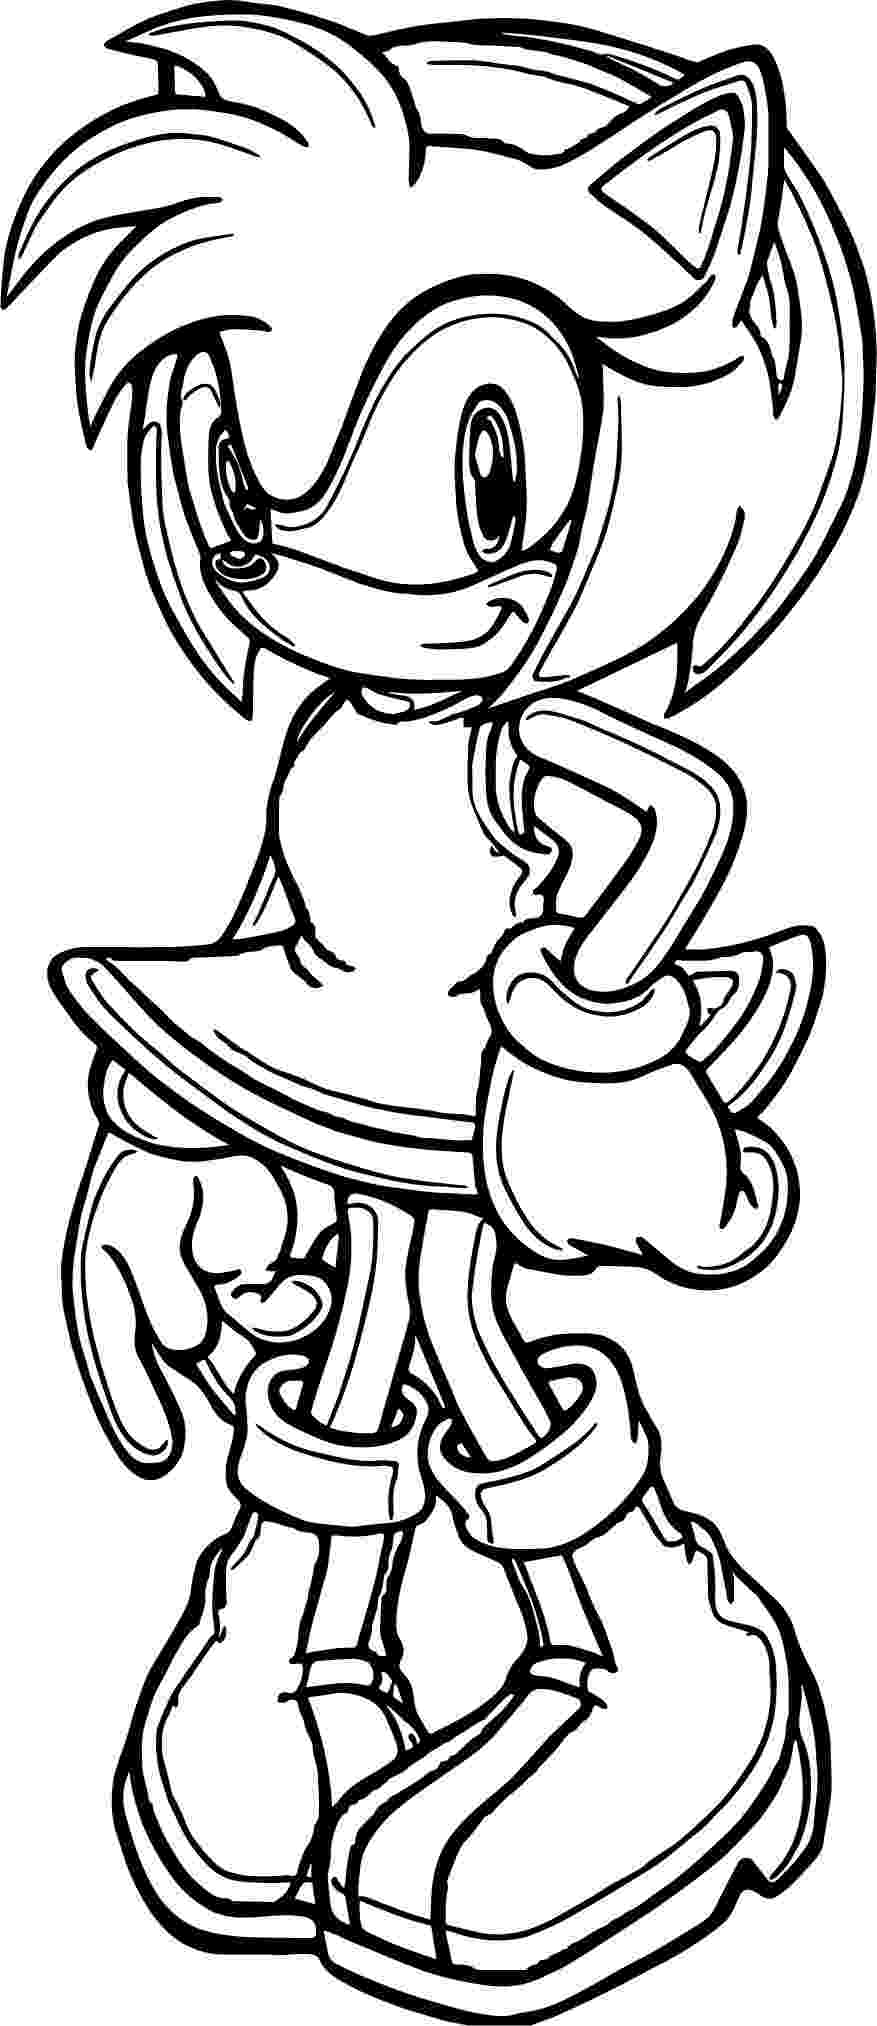 amy rose coloring pages amy rose coloring pages to download and print for free pages rose coloring amy 